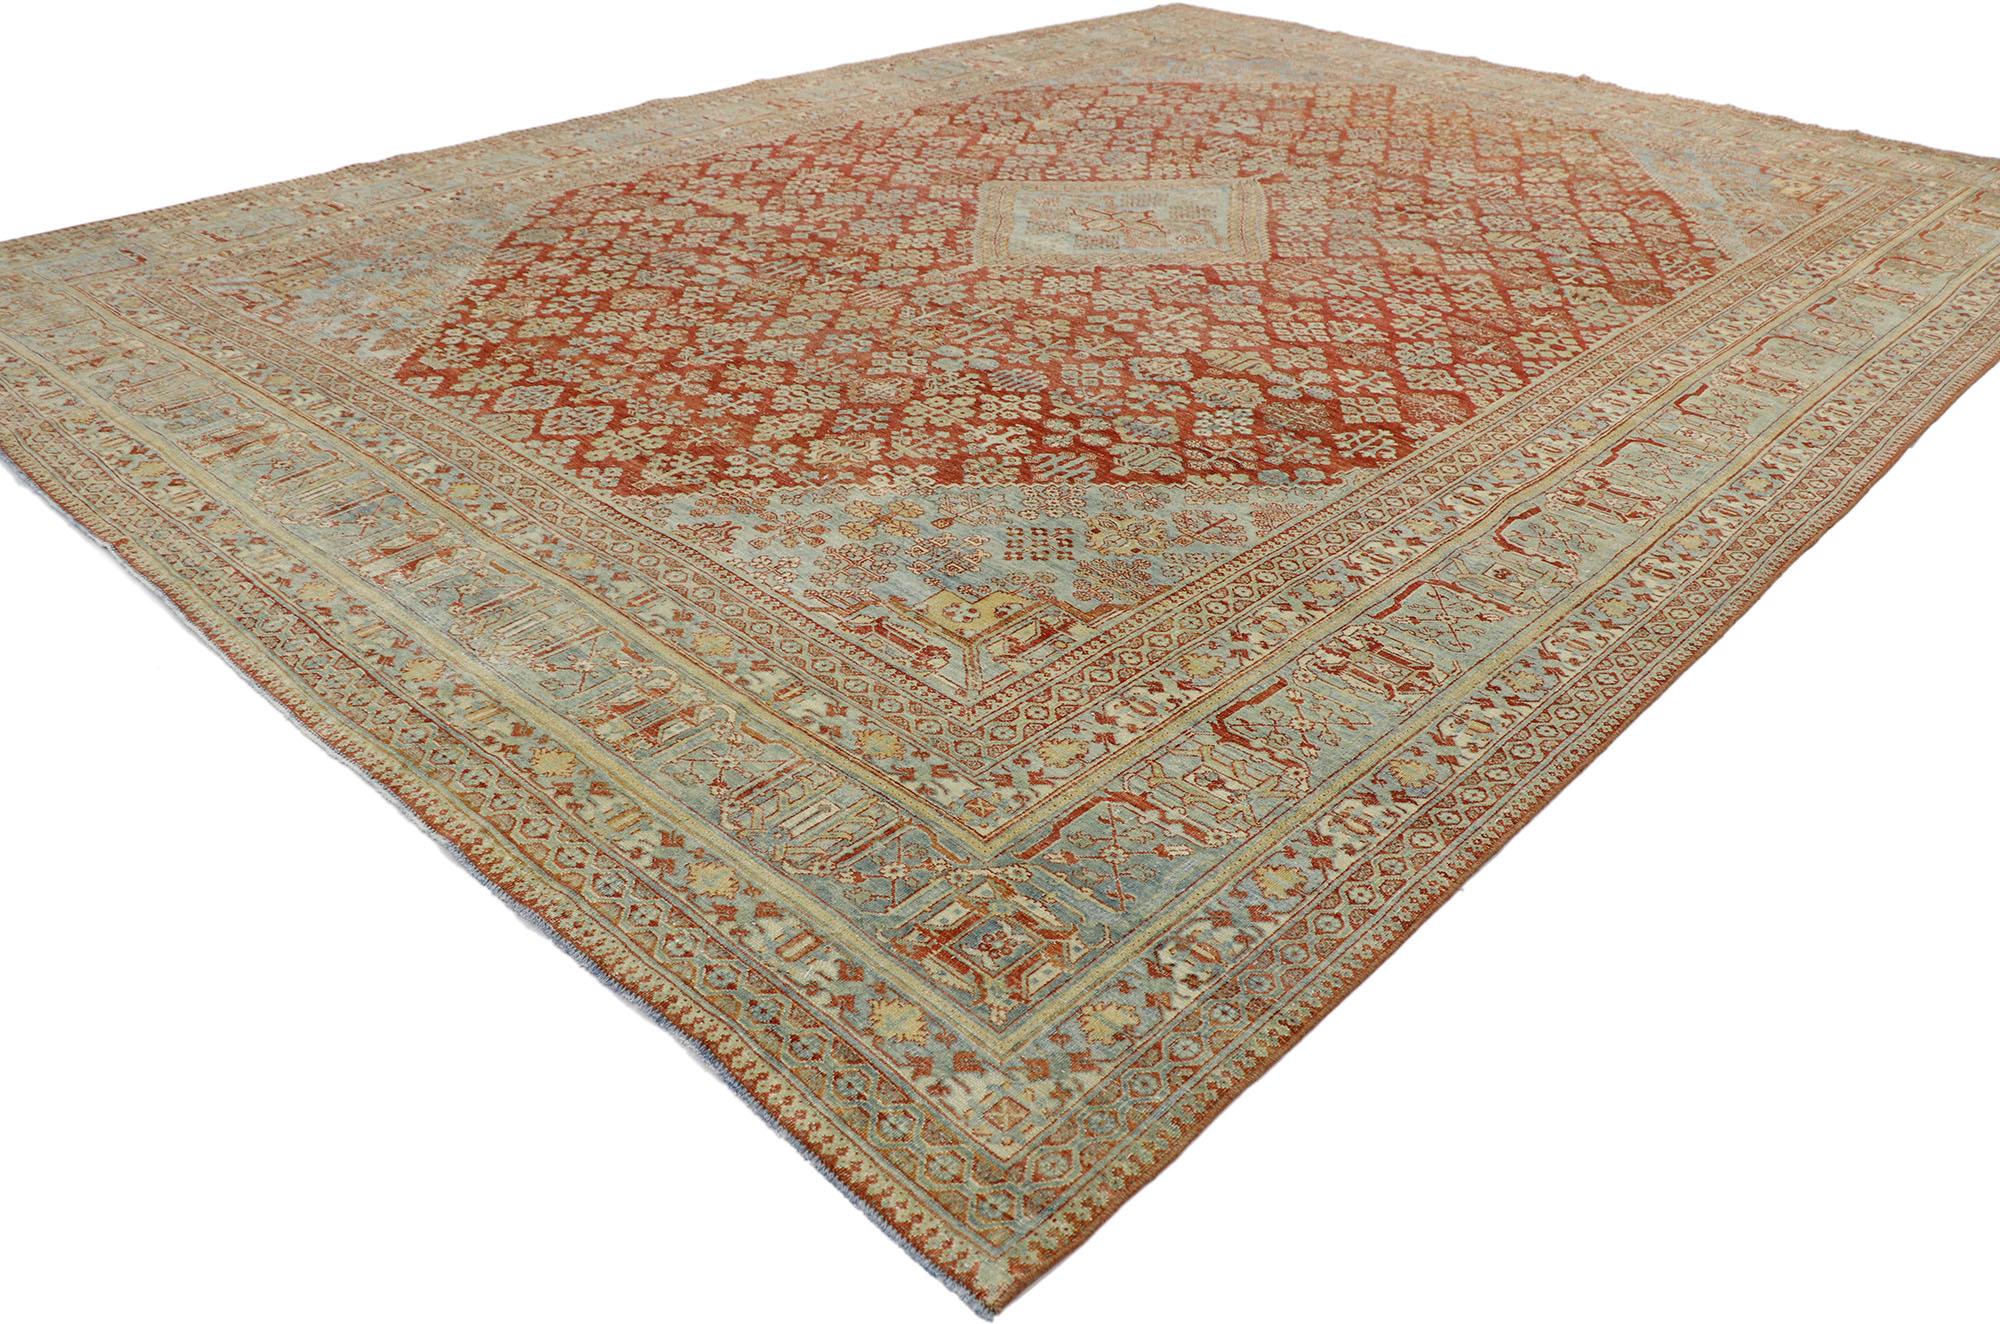 53231, distressed antique Persian Joshegan rug with modern rustic English style. With relaxed rustic Federal style and a lovingly time-worn composition, this hand knotted wool distressed antique Persian Joshegan rug is well-balanced and poised to